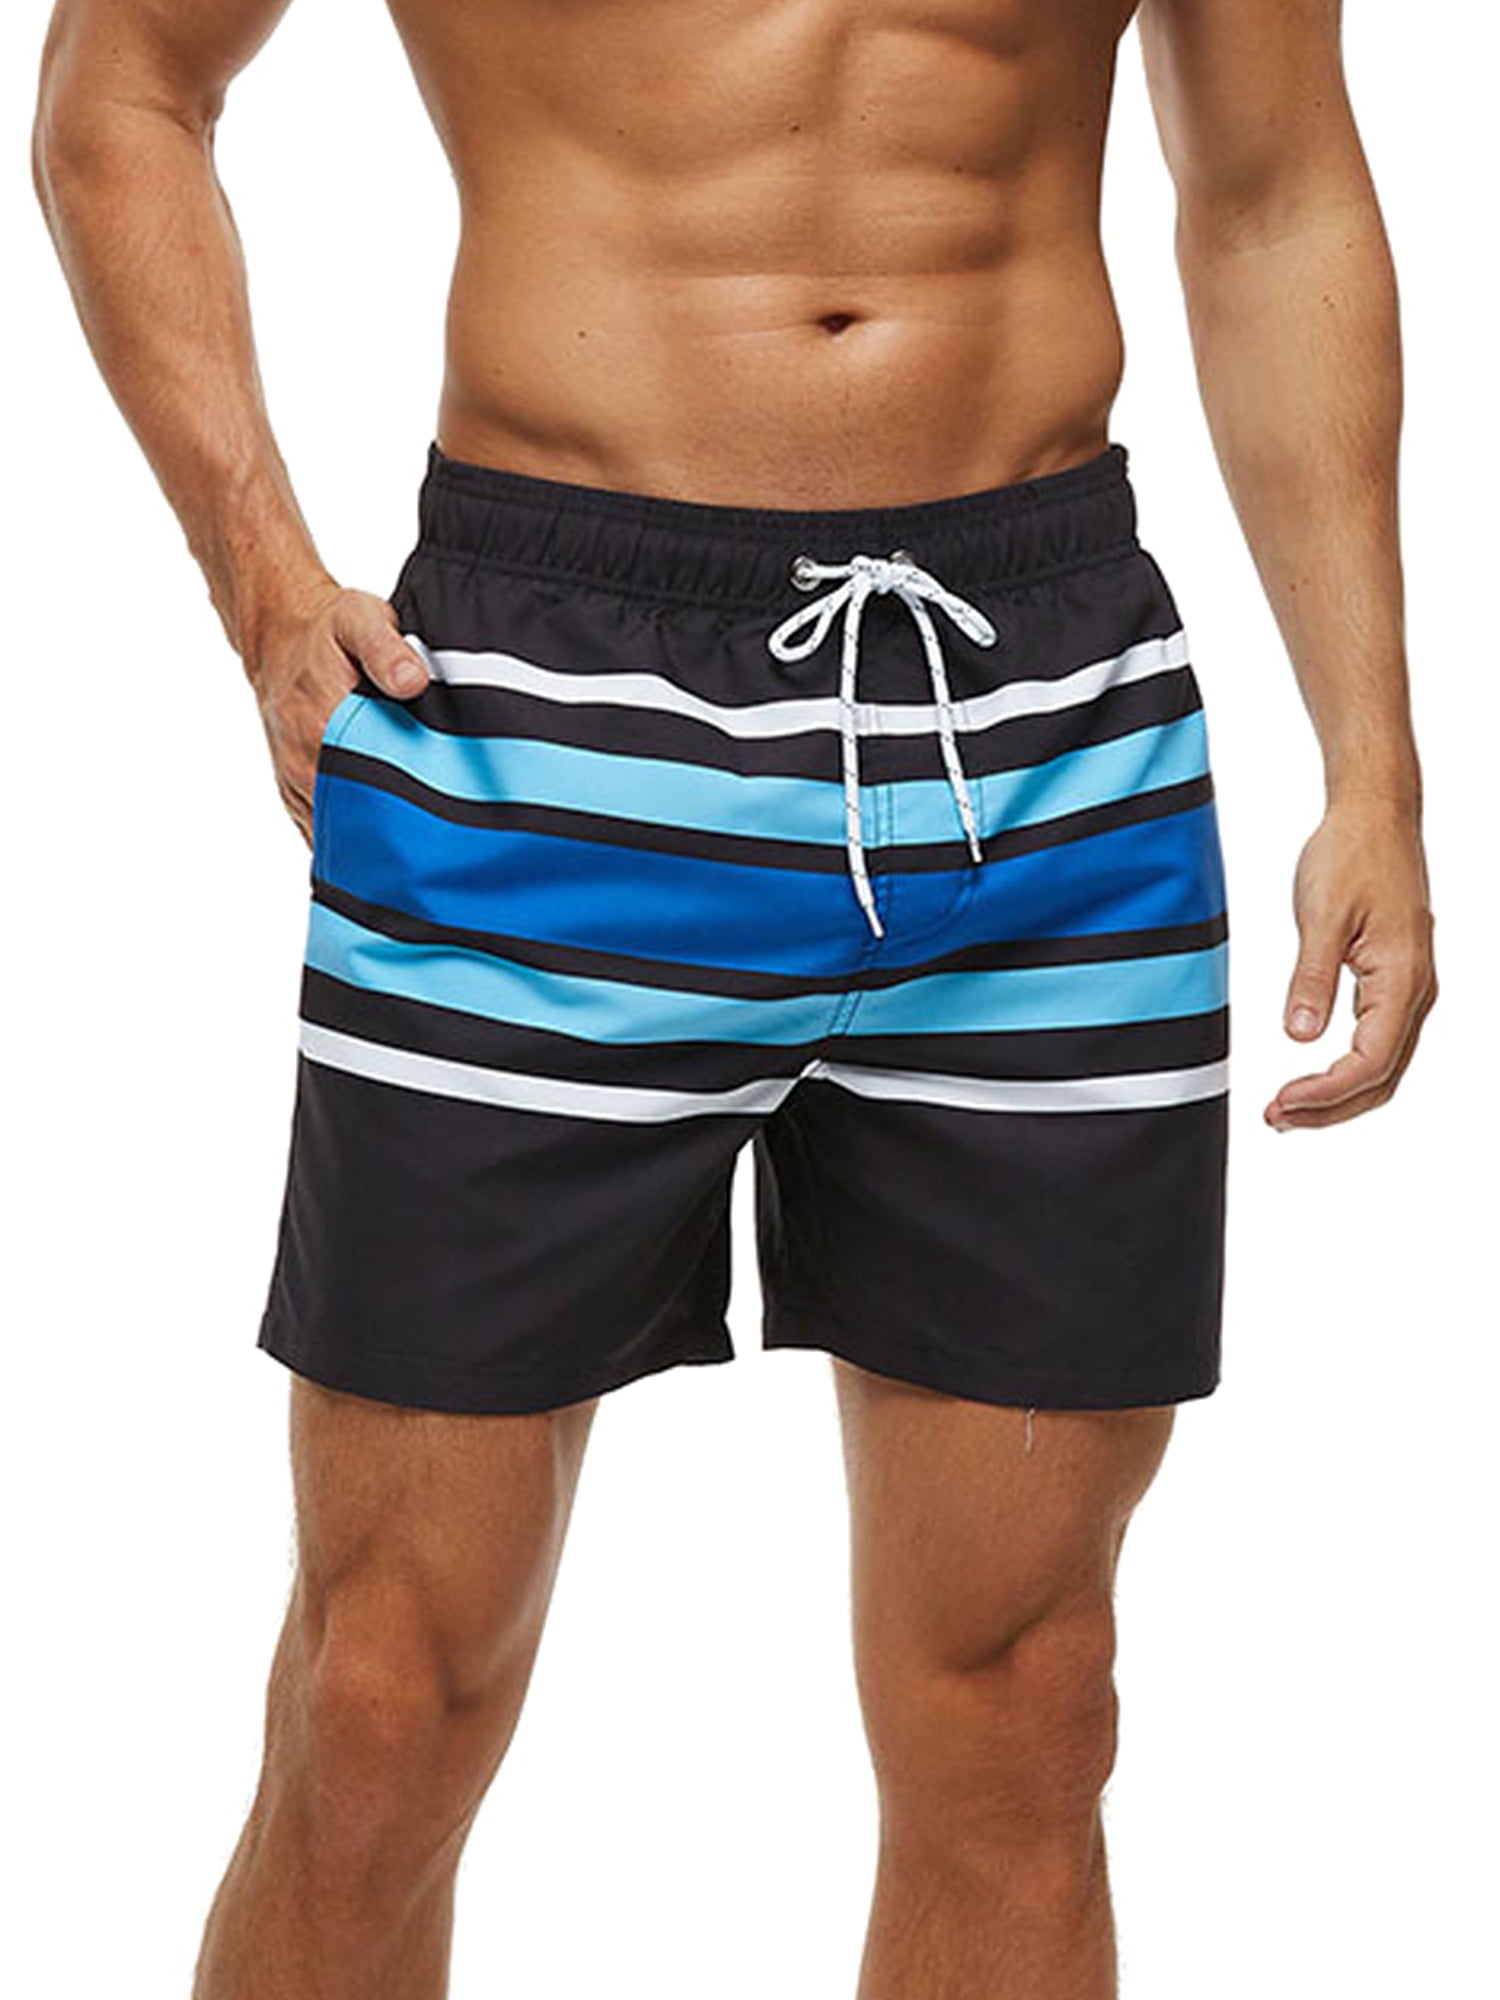 Mens Summer Swim Trunks Cool Quick Dry Beach Board Shorts Bathing Suit Hot Pants